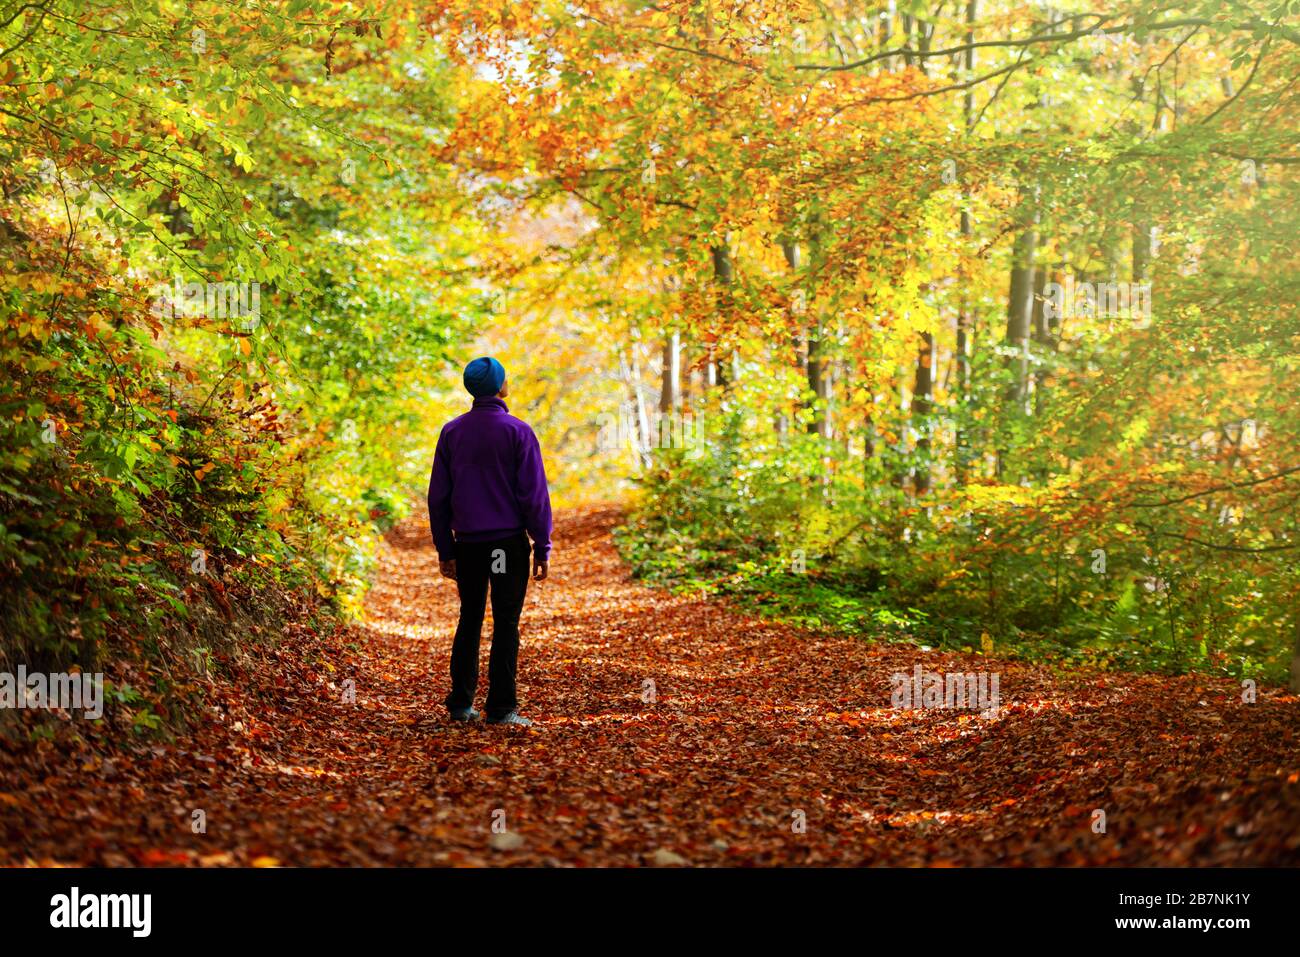 Man Walking In Autumn Forest With Orange Trees Landscape Photography Stock Photo Alamy